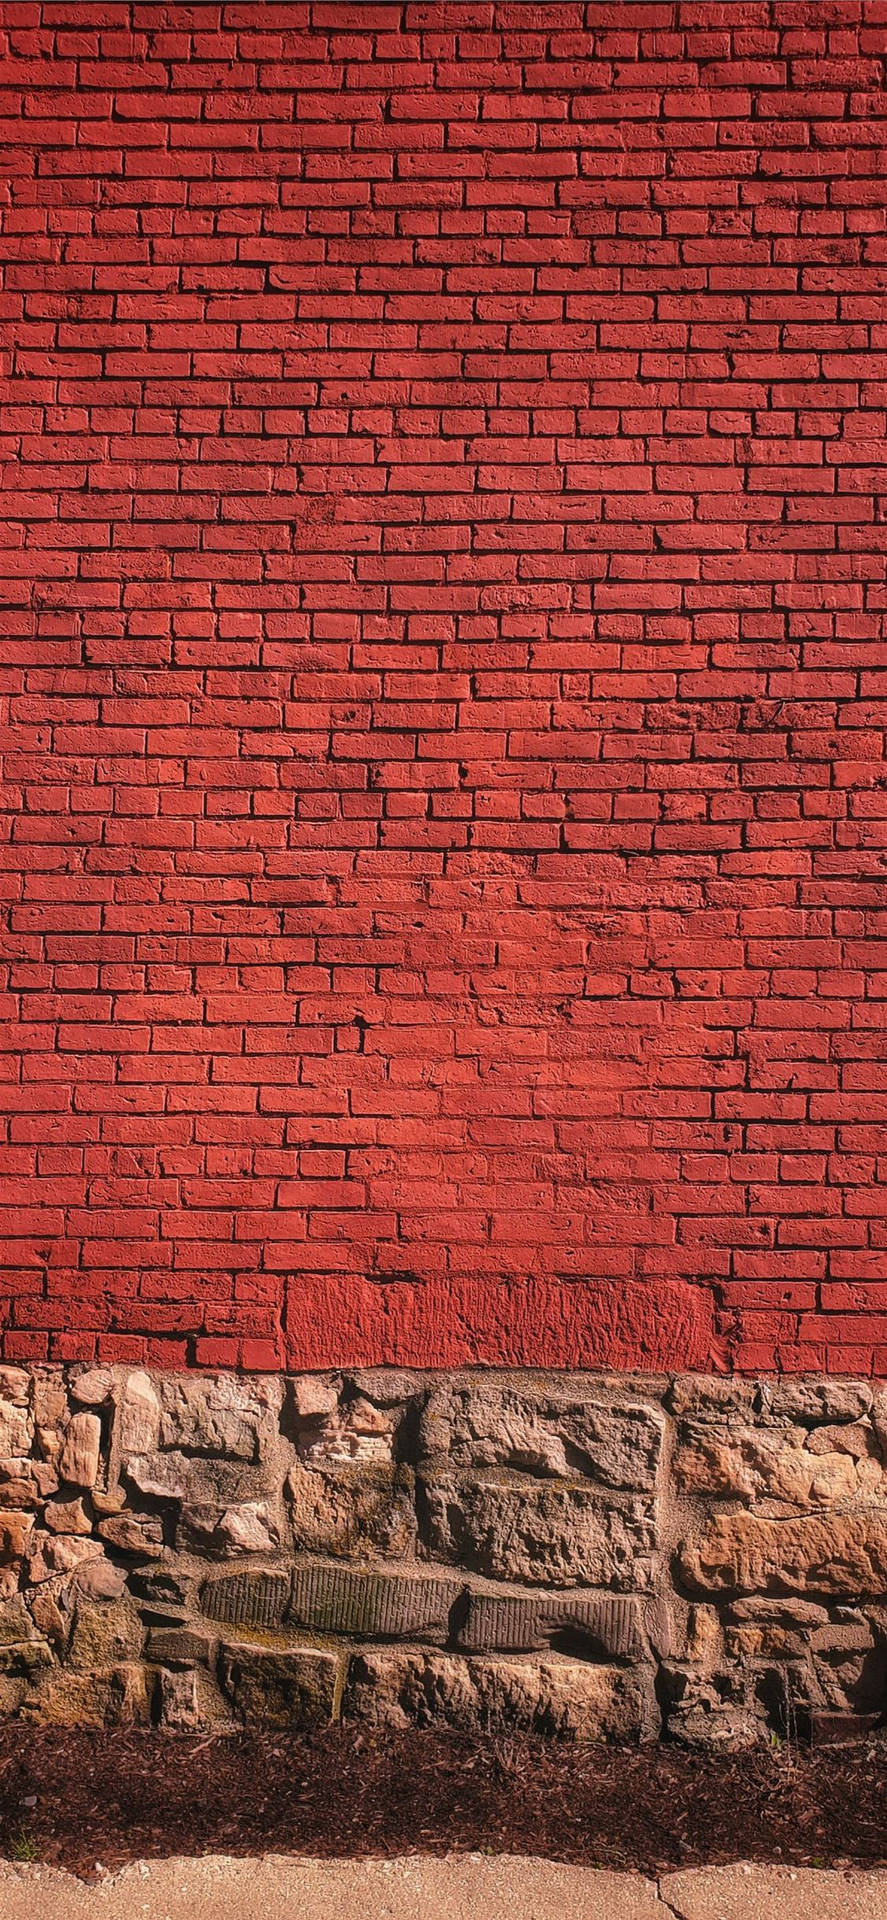 Red Brick Wall With Sediment Texture Base Wallpaper